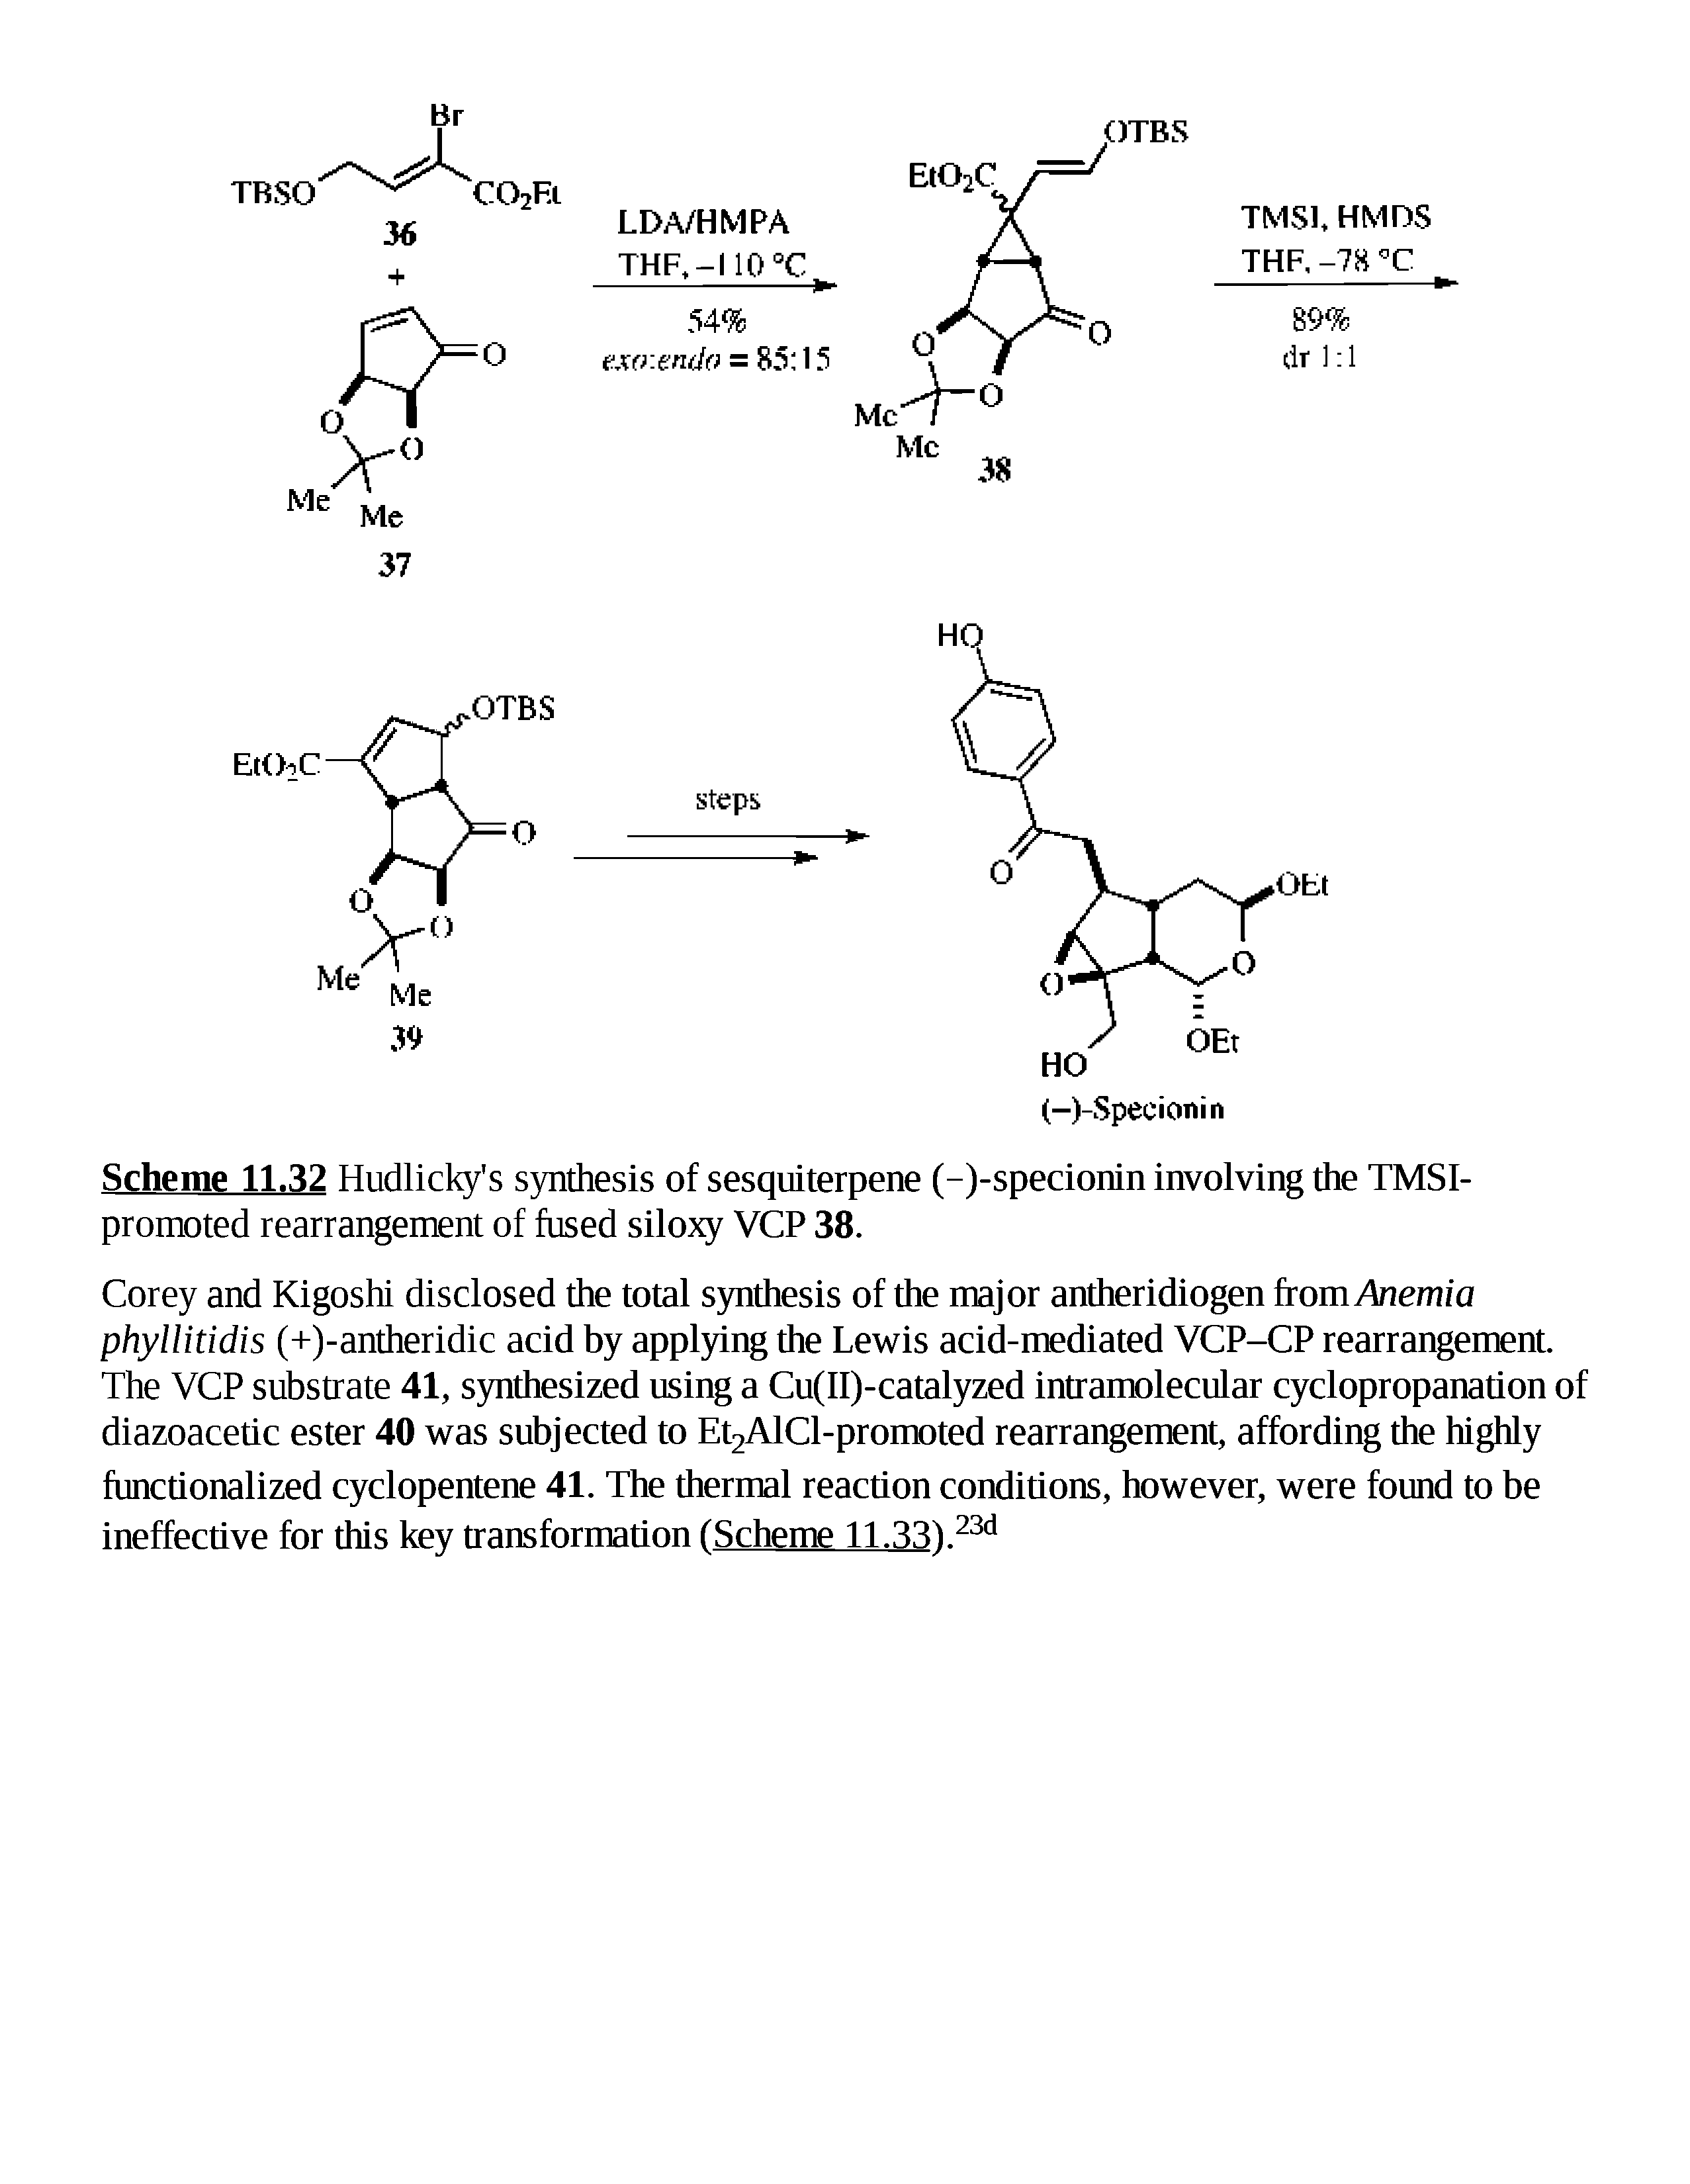 Scheme 11.32 Hudlicky s synthesis of sesquiterpene (-)-specionin involving the TMSI-promoted rearrangement of fused siloxy VCP 38.